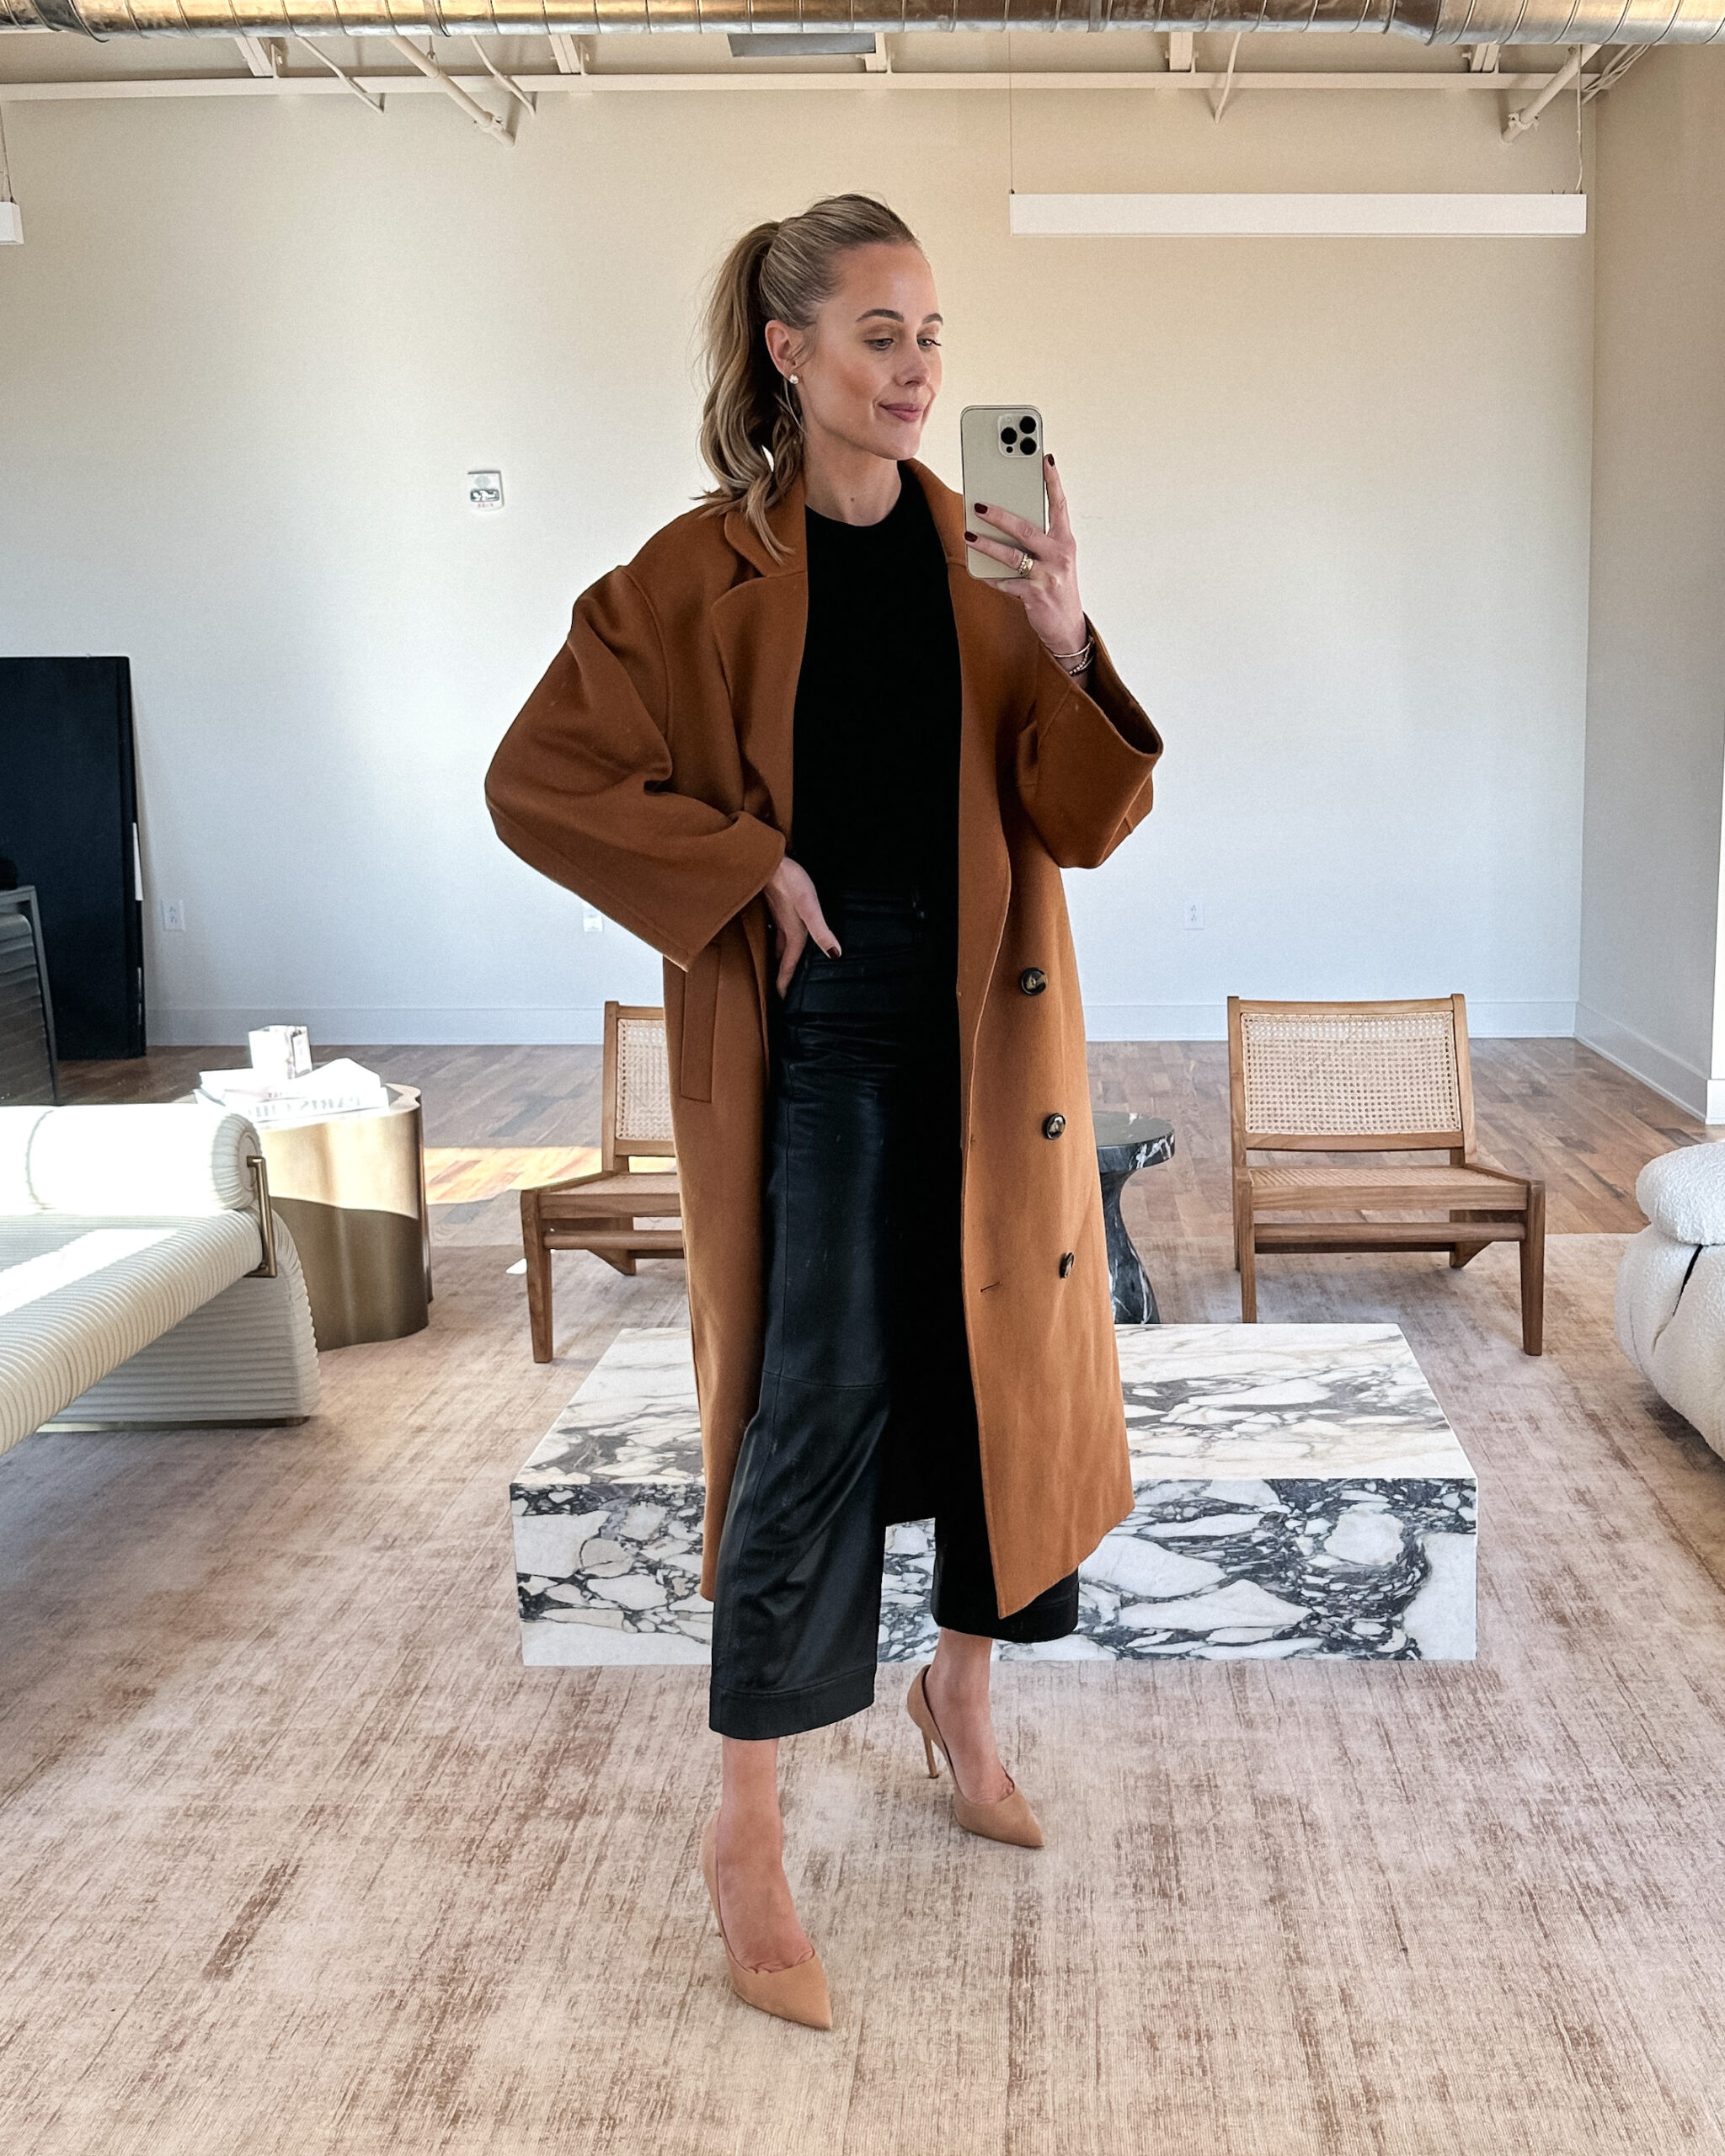 Fashion Jackson Wearing LouLou Studio Camel Coat Everlane Black Cashmere Sweater Black Leather Cropped Pants Nude Pumps Fall Outfit Workwear Outfit